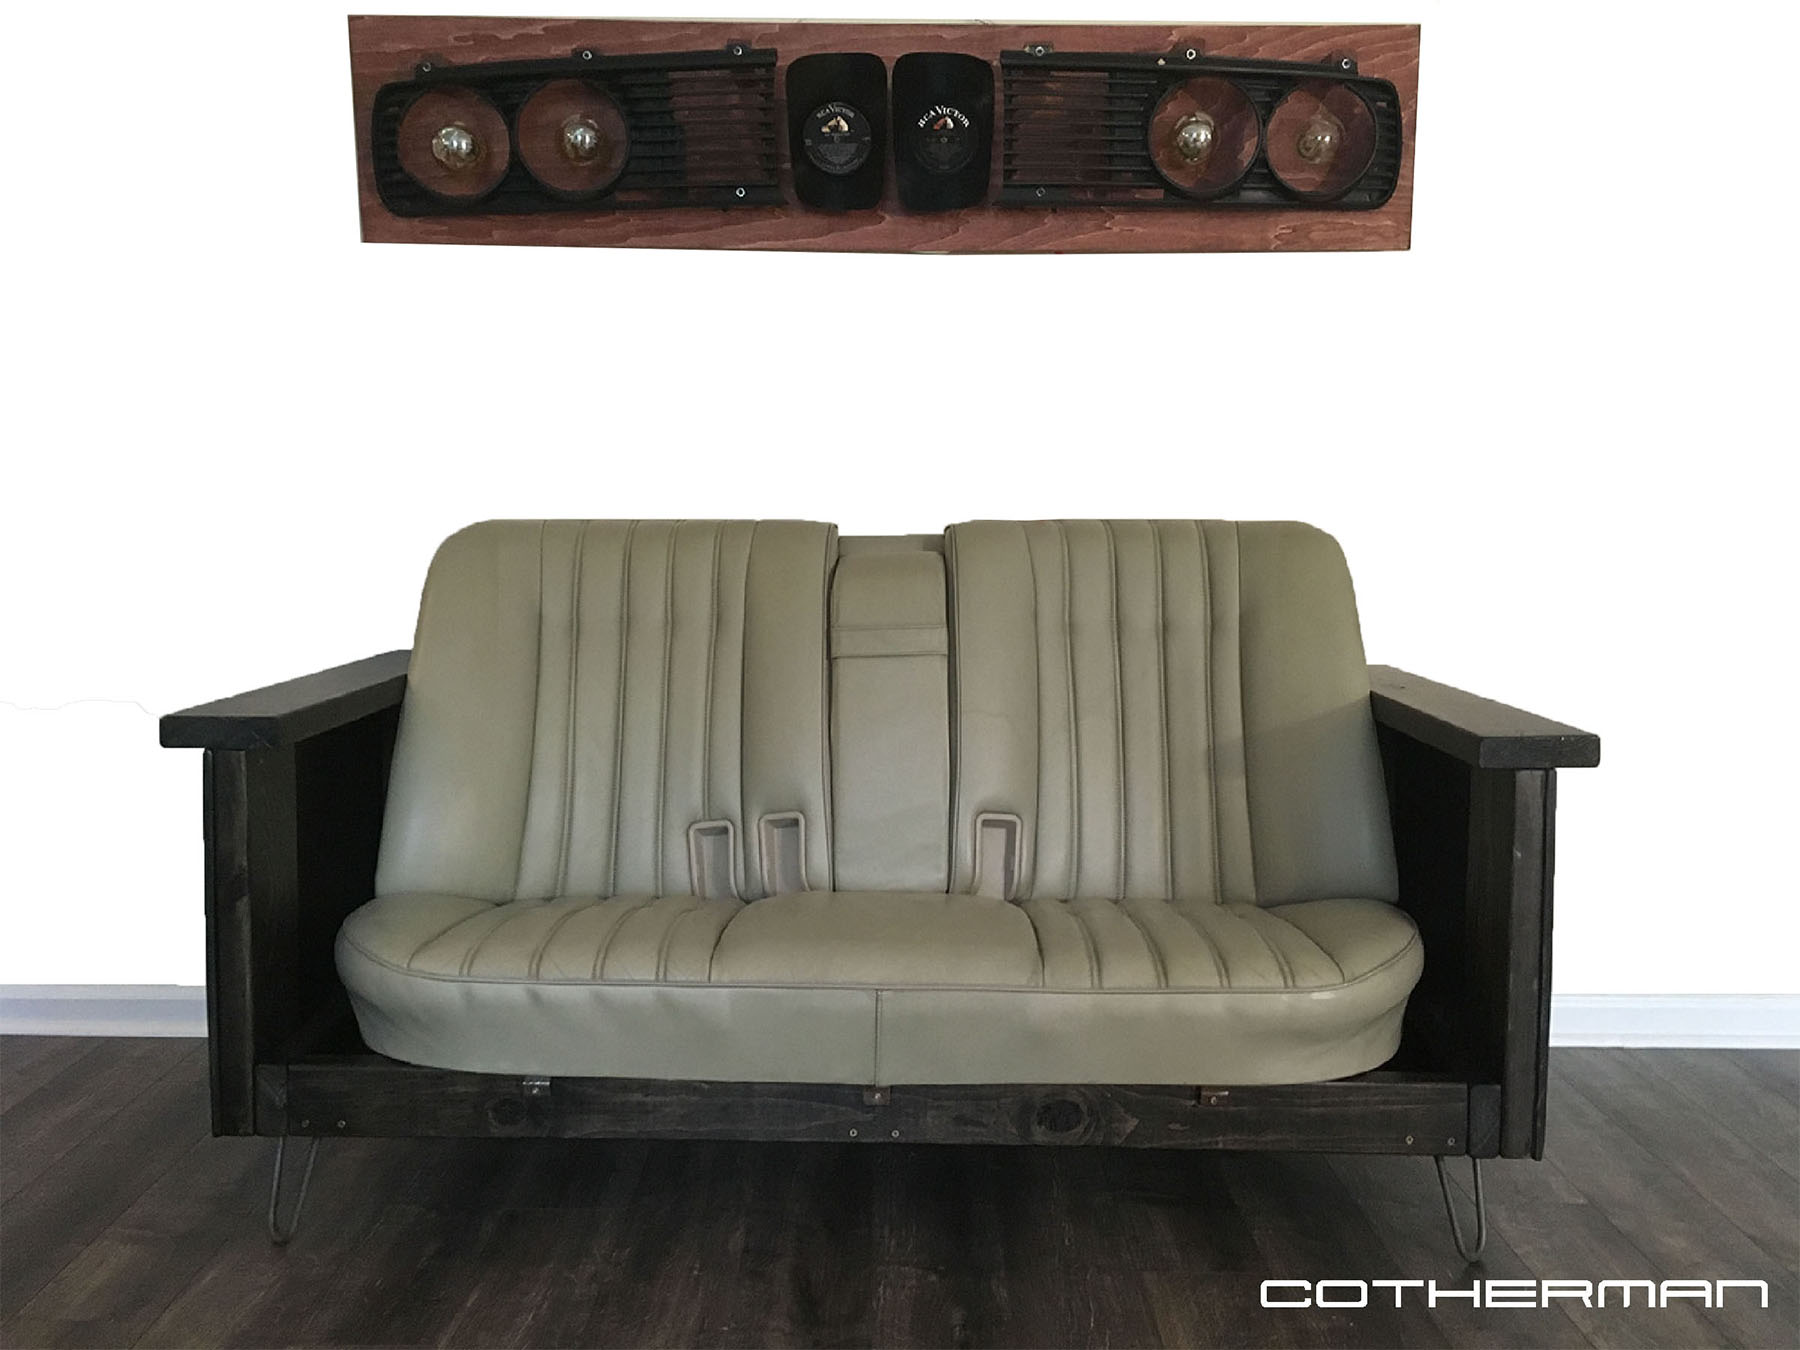 BMW Couch